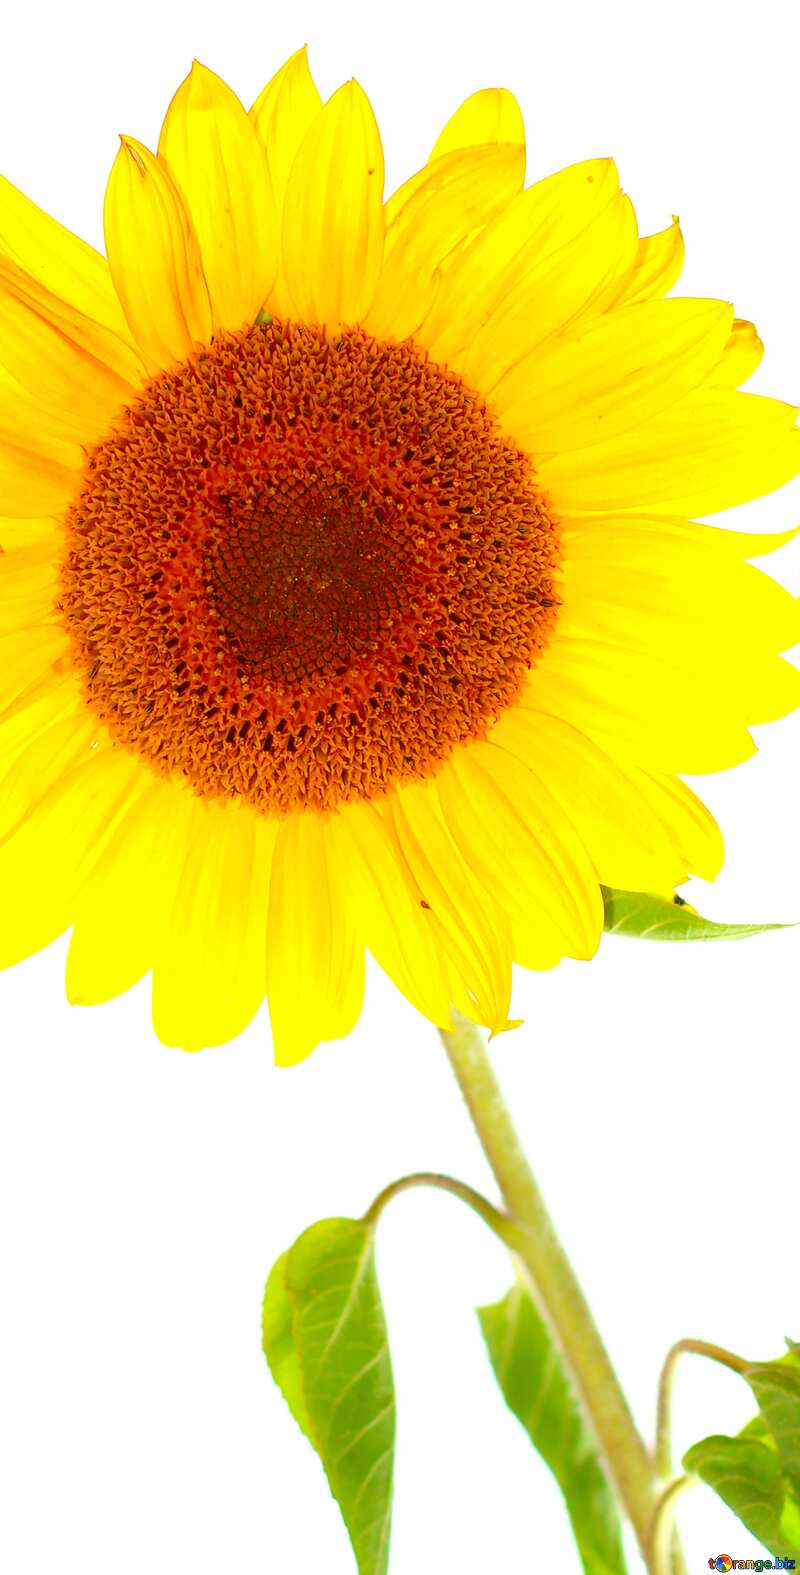 Image for profile picture Sunflower flower on isolated white background. №32794